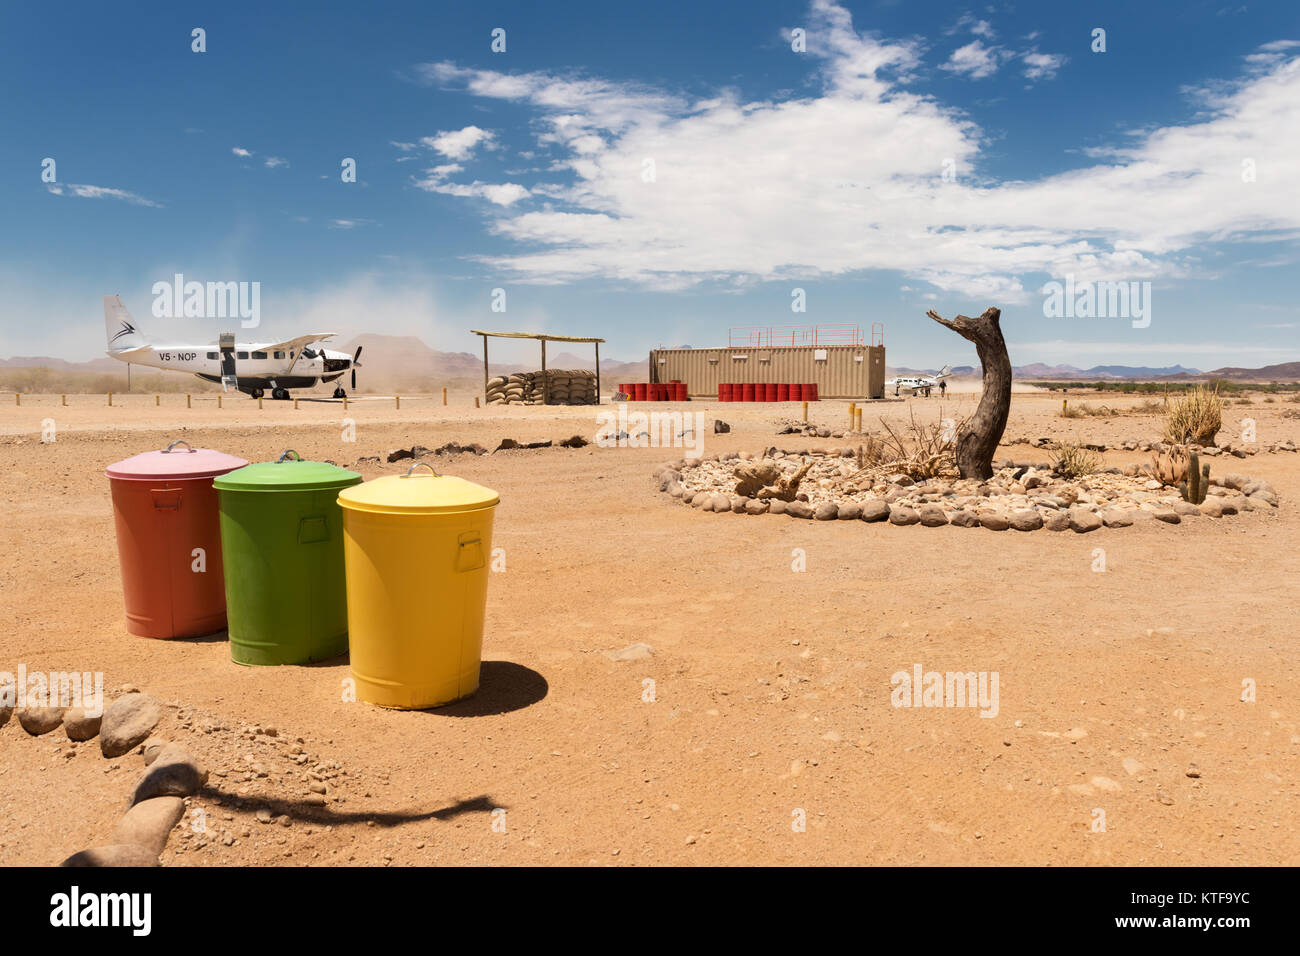 Doro Nawas Airfield, Damaraland, Namibie. Banque D'Images